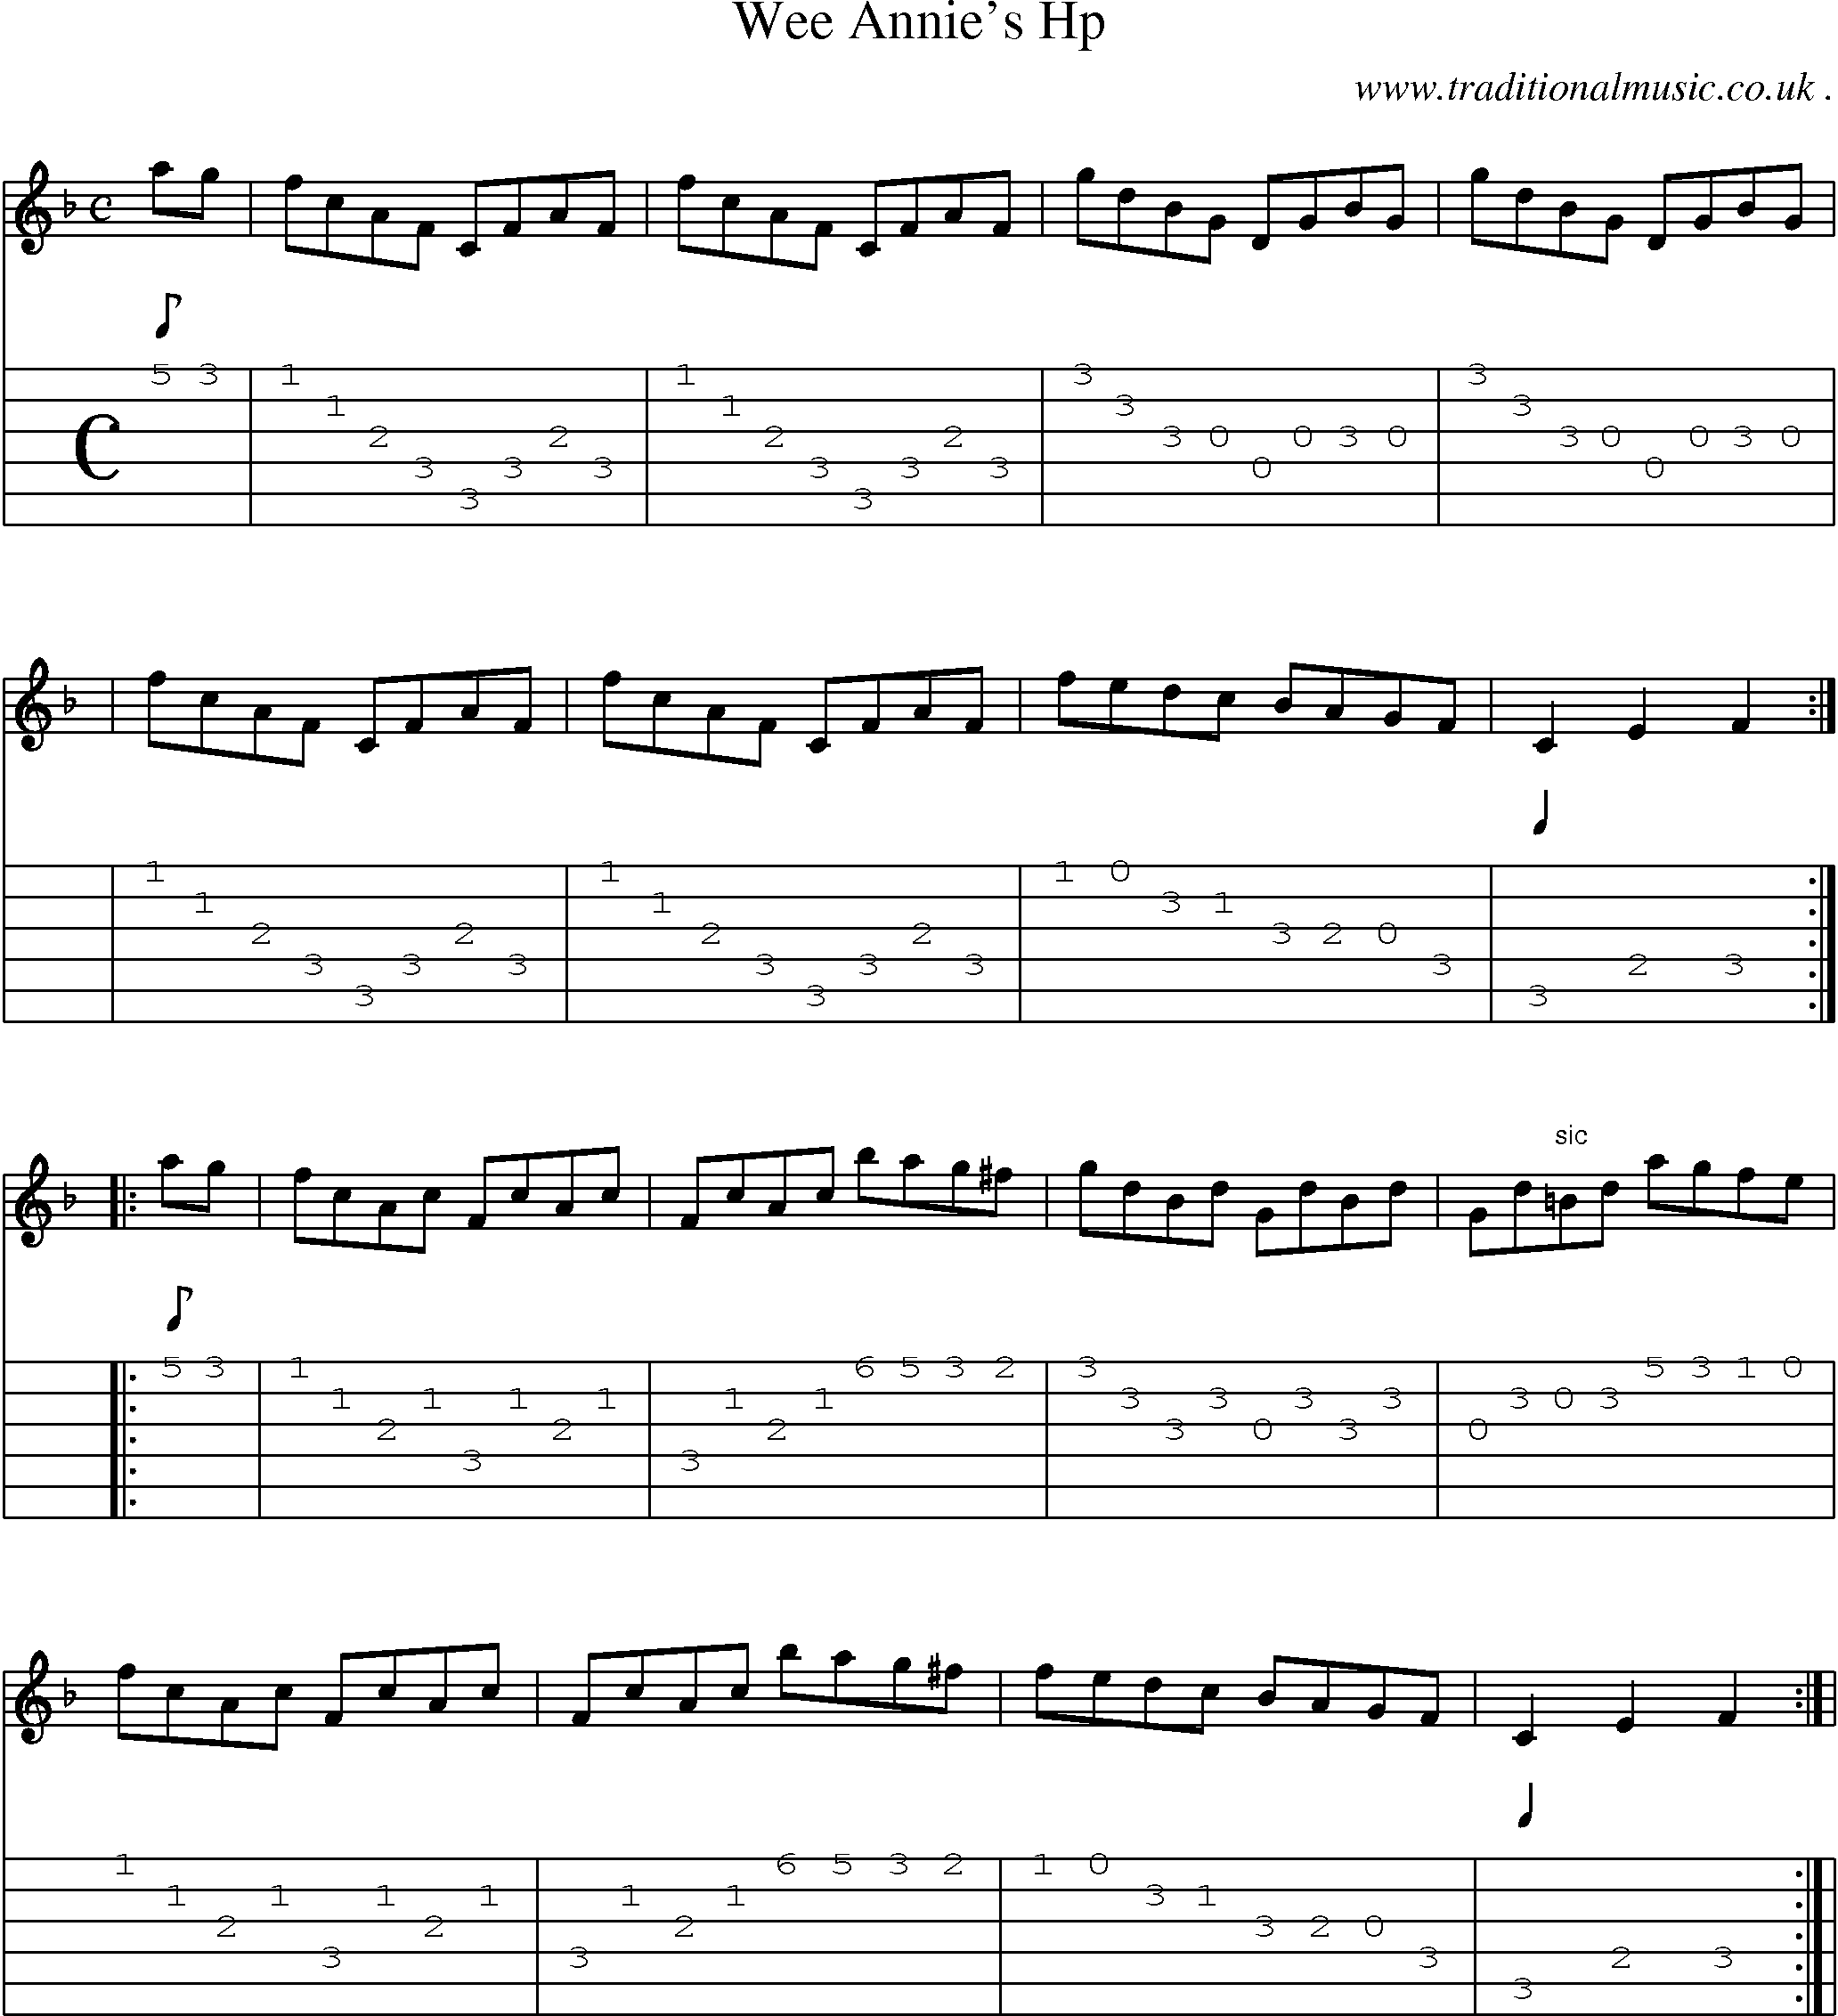 Sheet-Music and Guitar Tabs for Wee Annies Hp